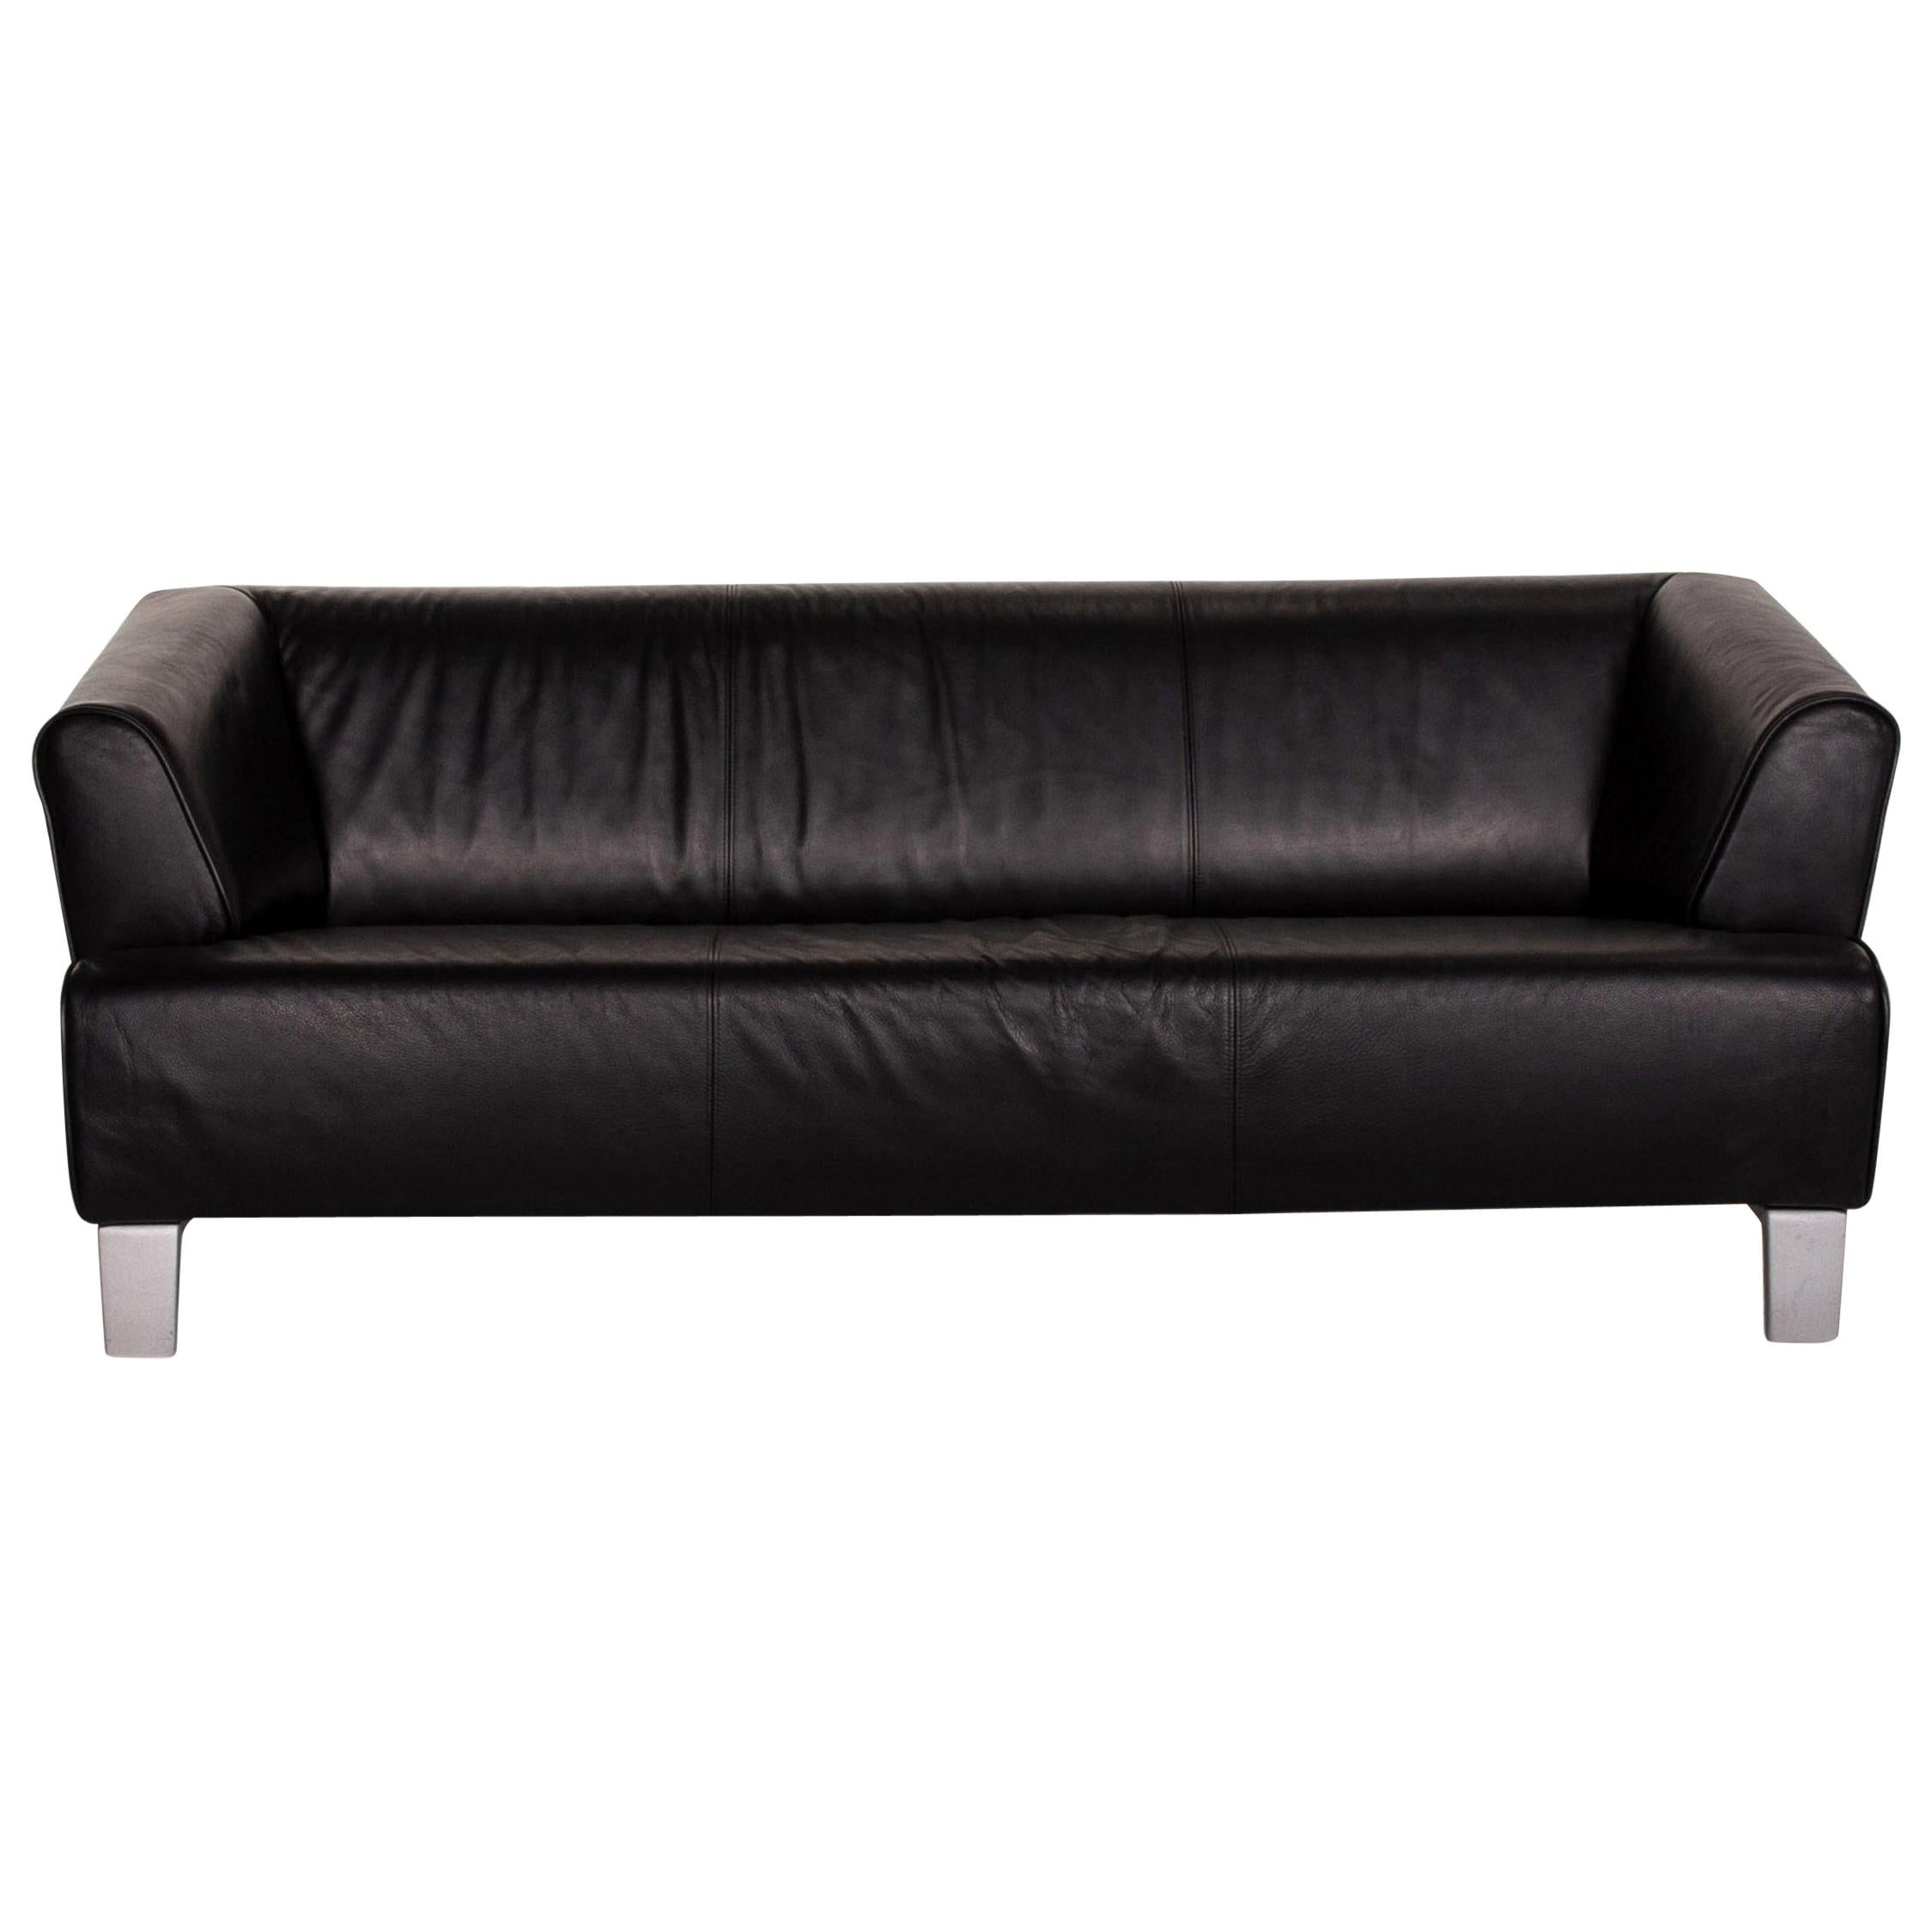 Rolf Benz Leather Sofa Black Two-Seat Couch For Sale